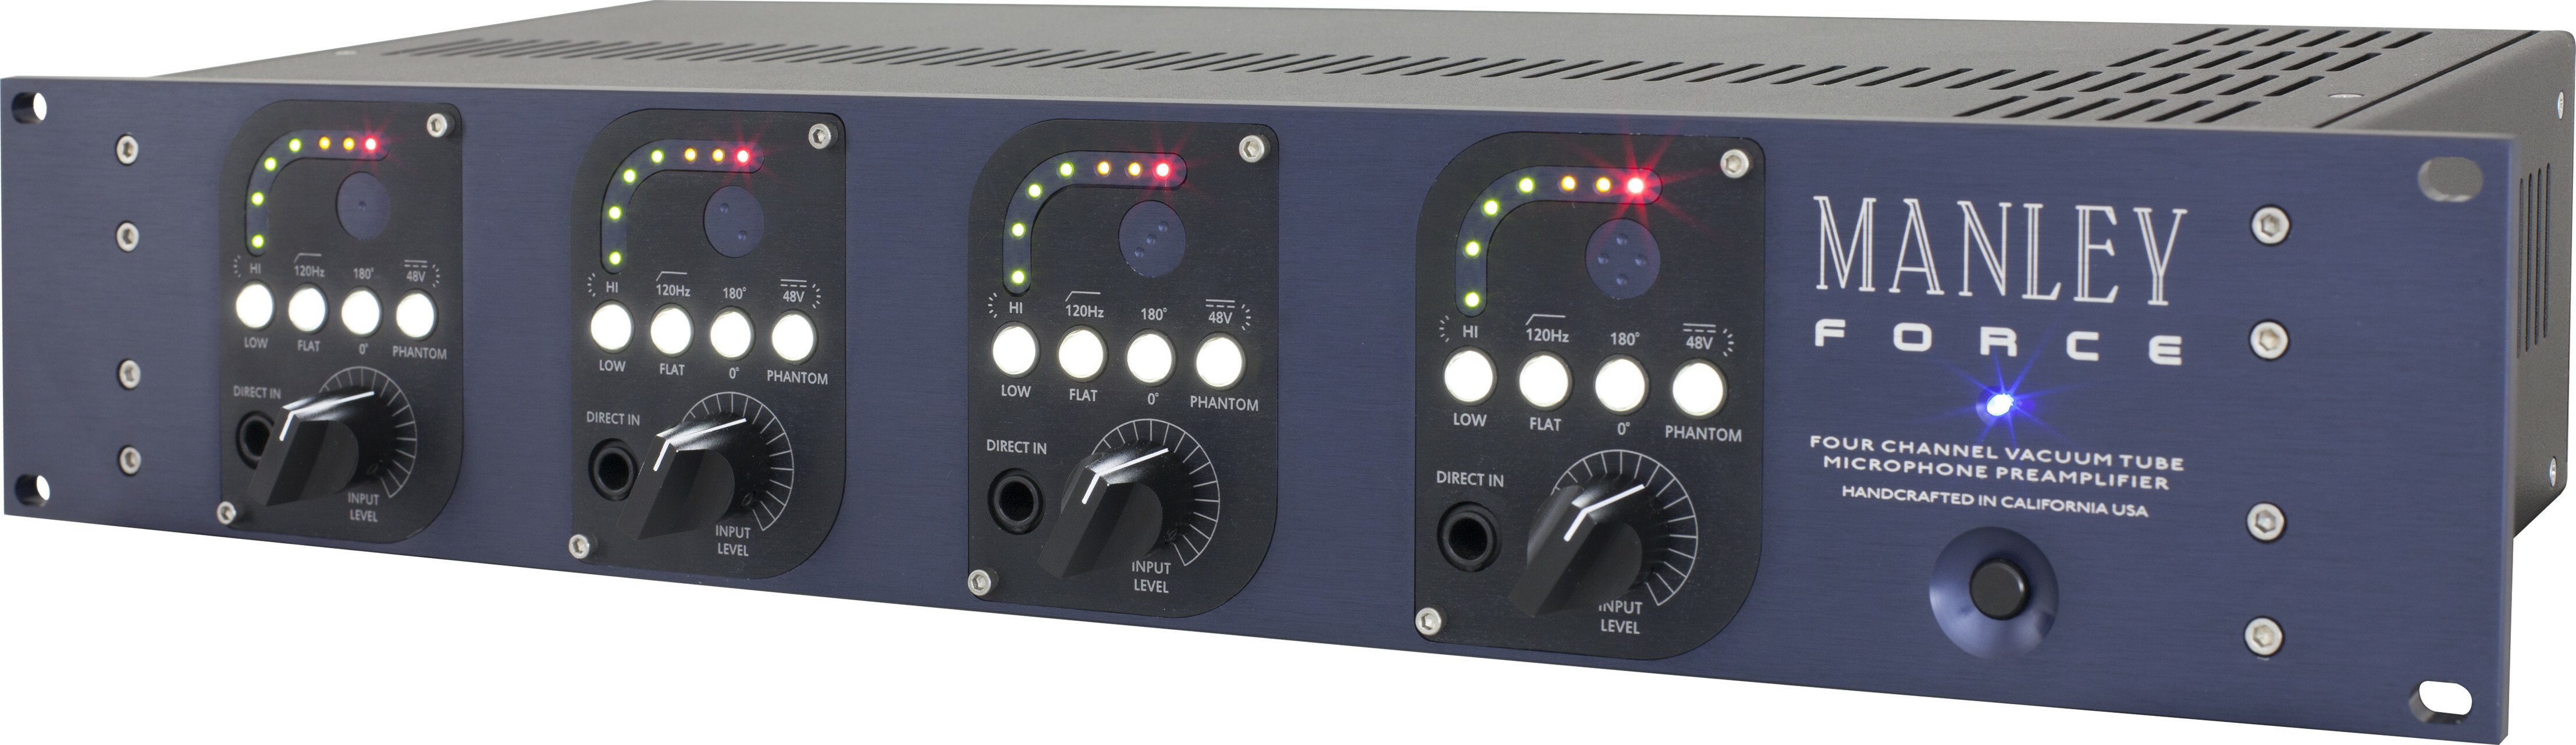 Manley Force - Preamp - Main picture